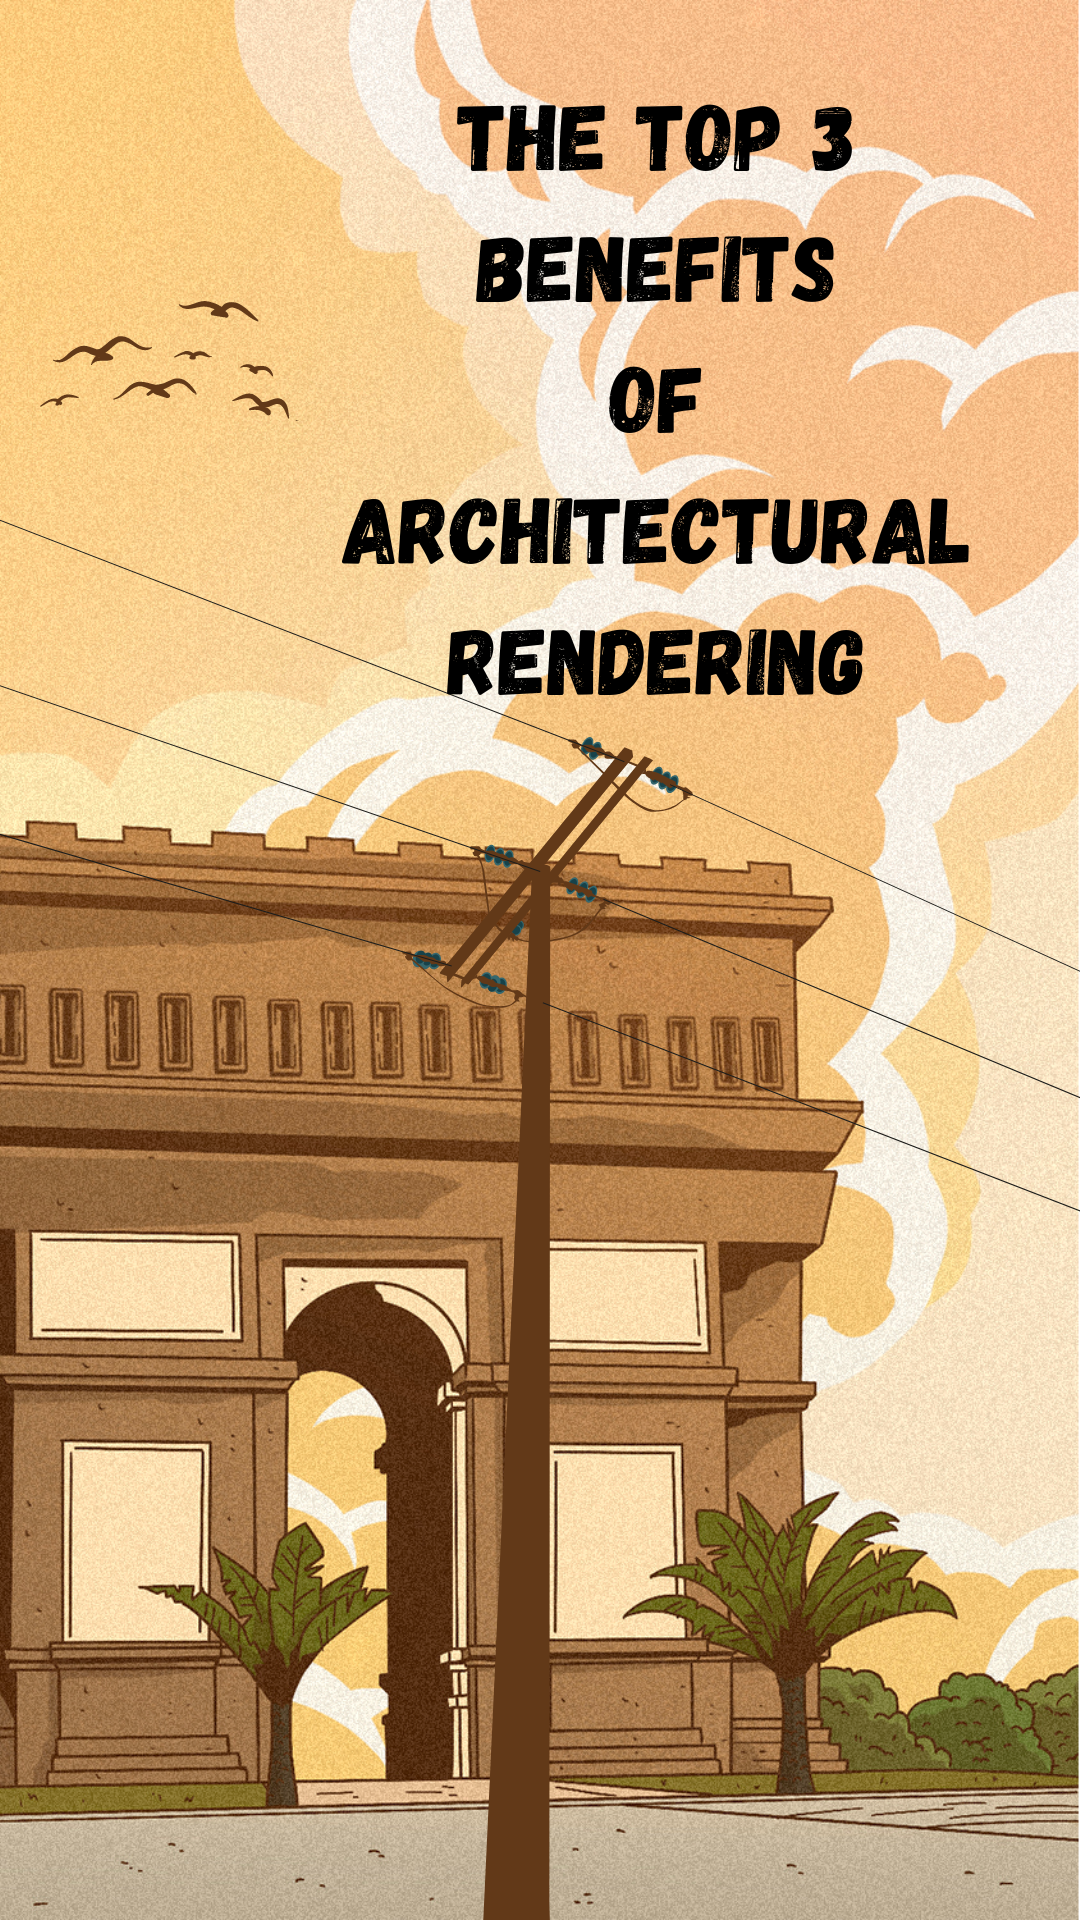 An orange cartoon of a building, a telephone pole, and birds. Black words are in the sky that say "the top 3 benefits of architectural rendering."